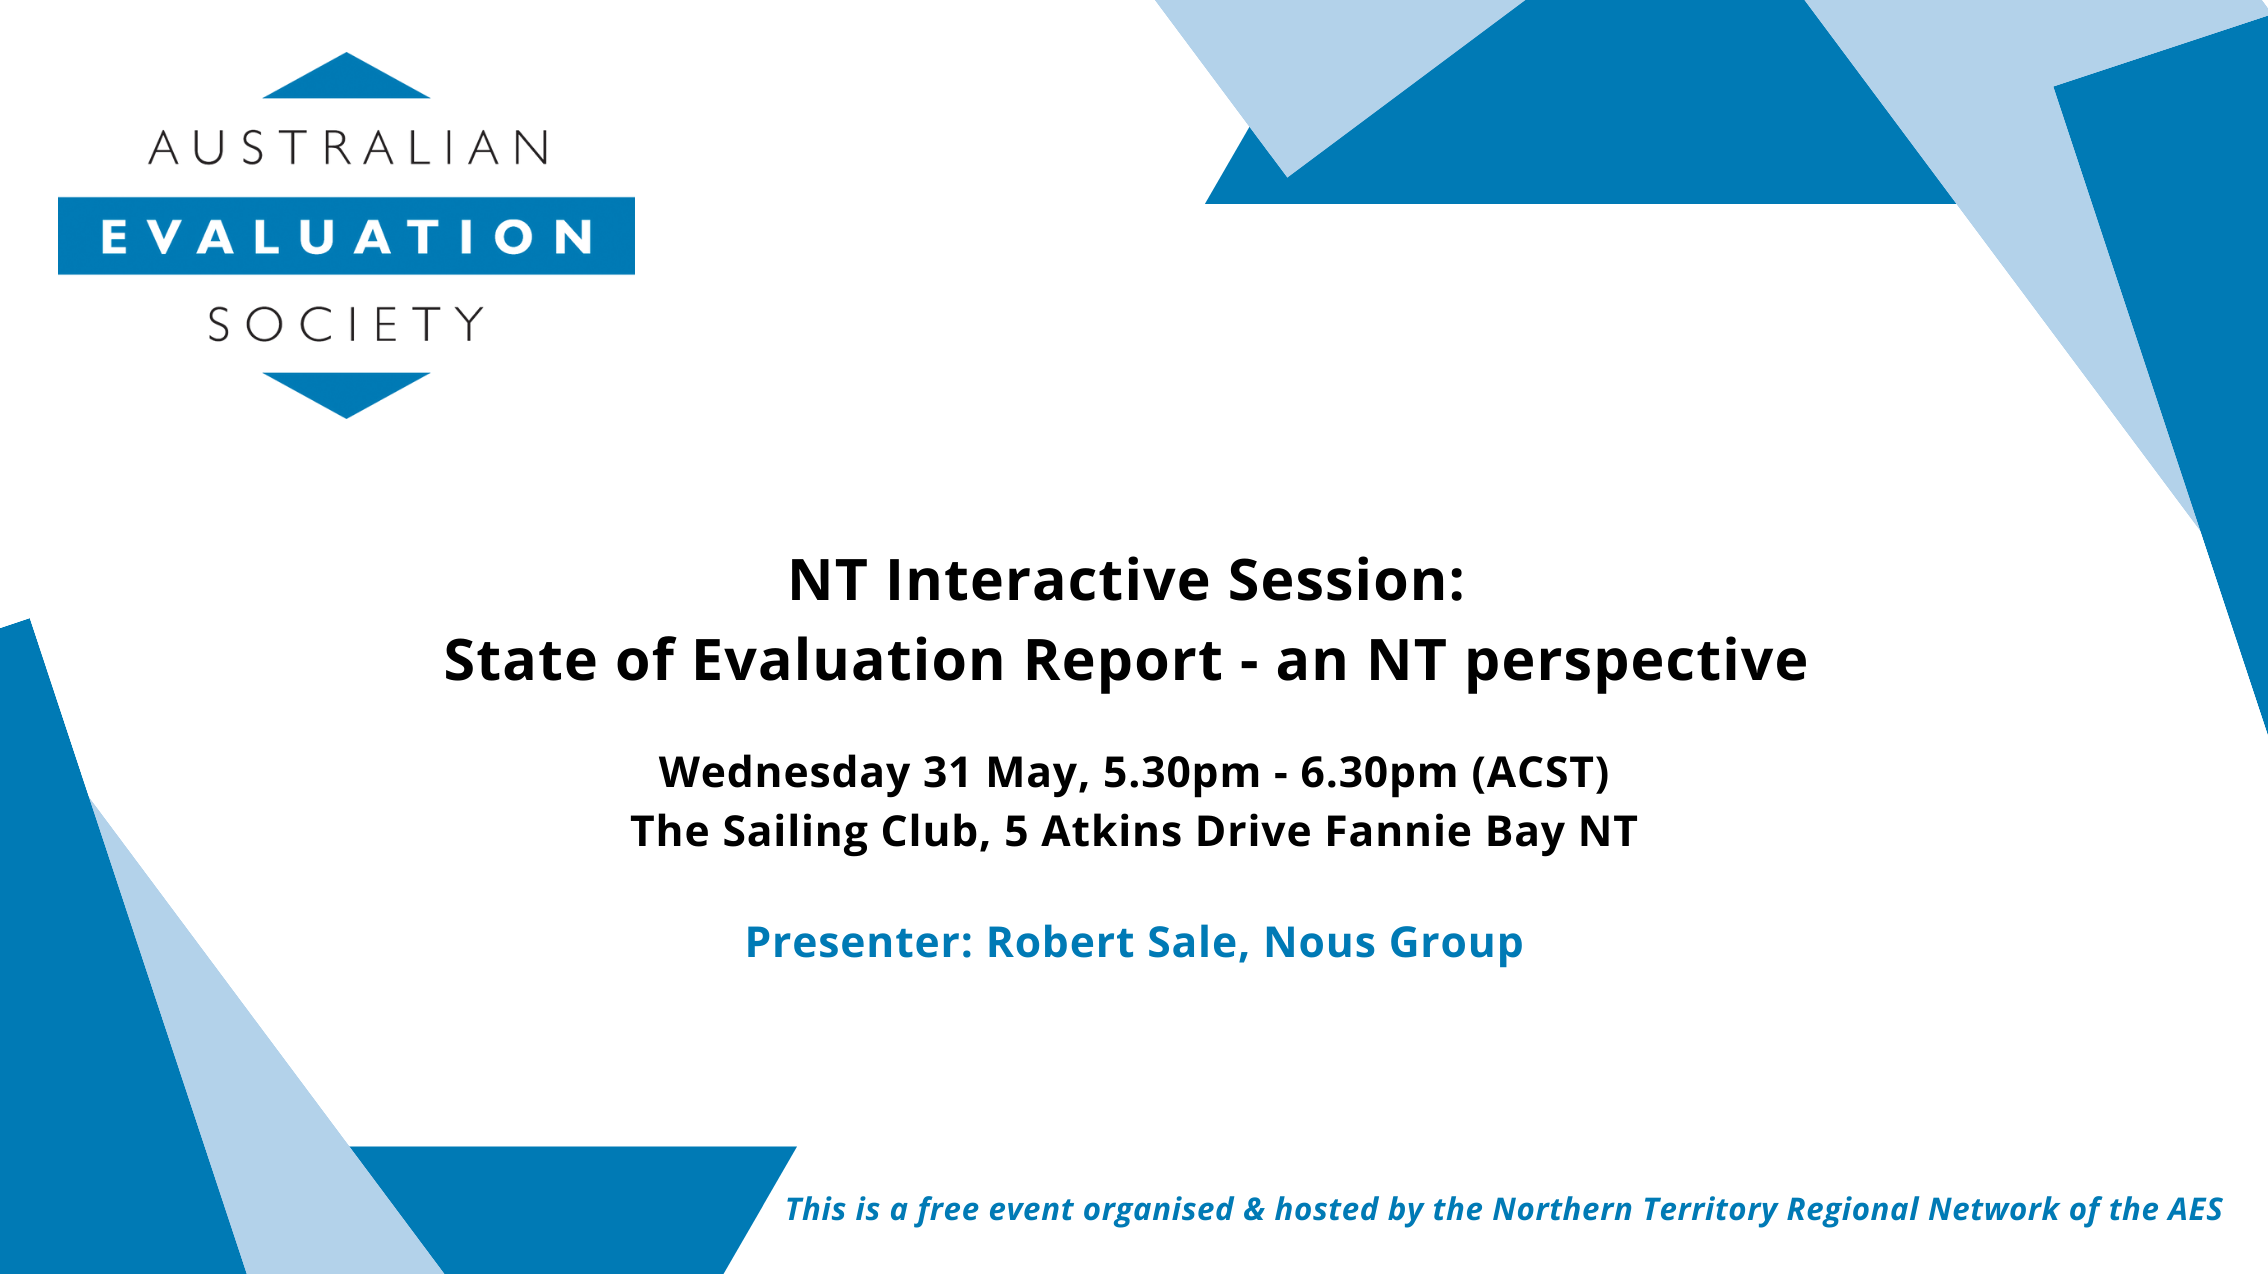 State of Evaluation Report an NT perspective